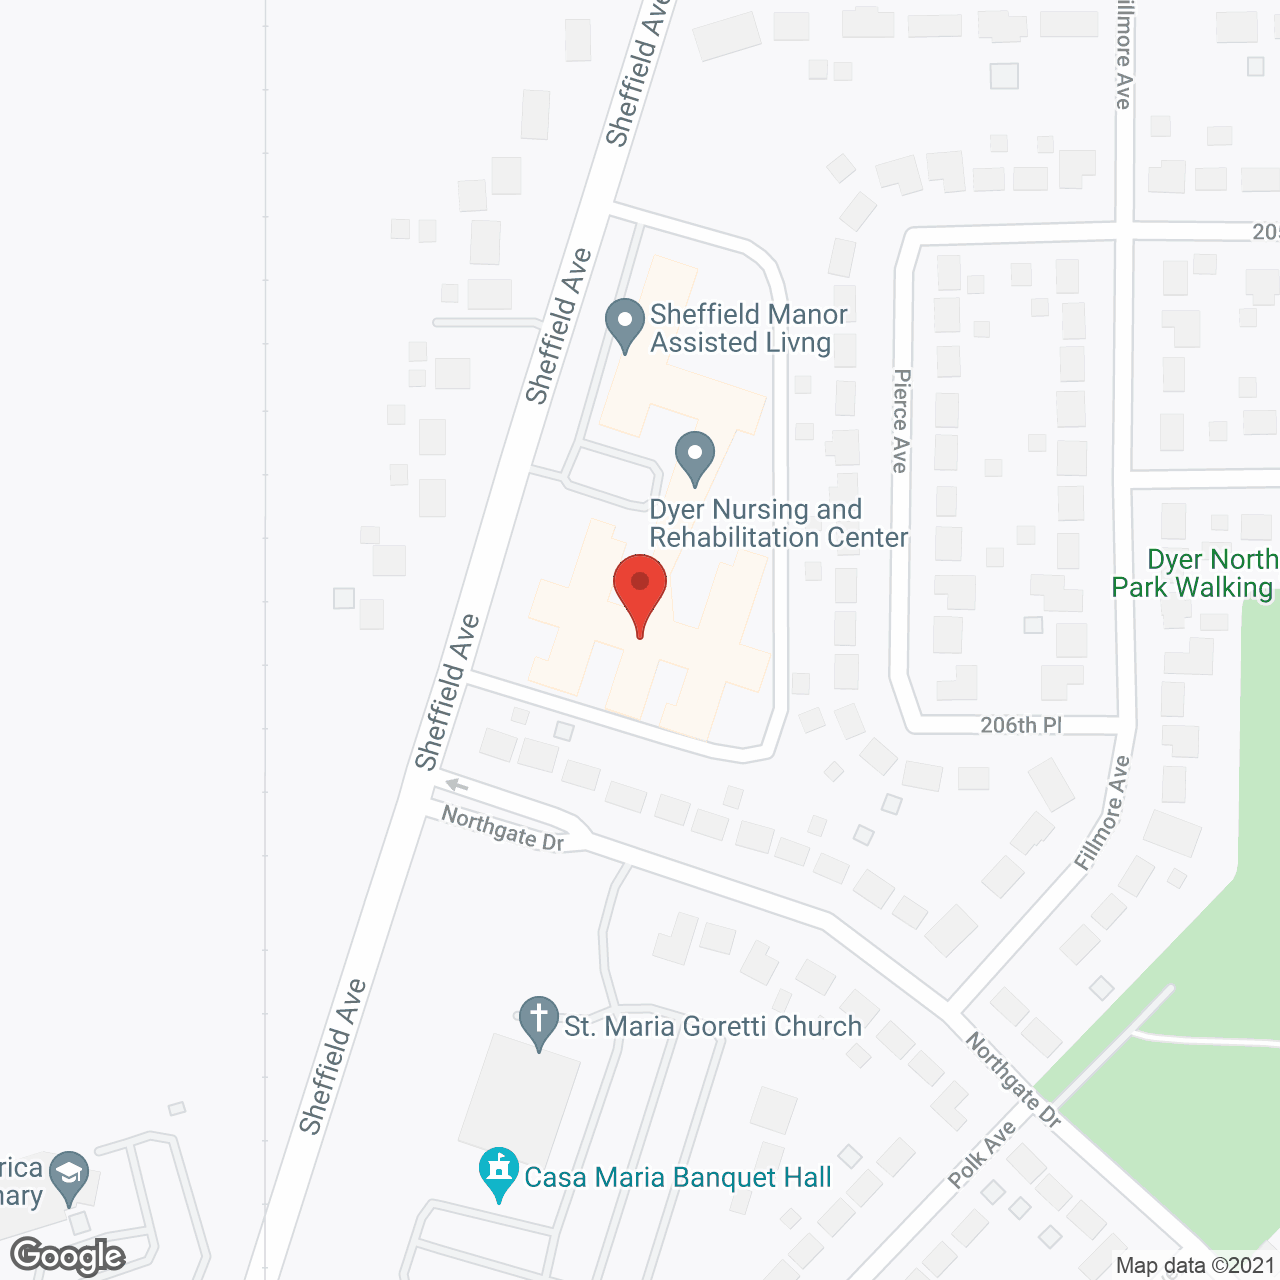 Sheffield Manor Assisted Living in google map